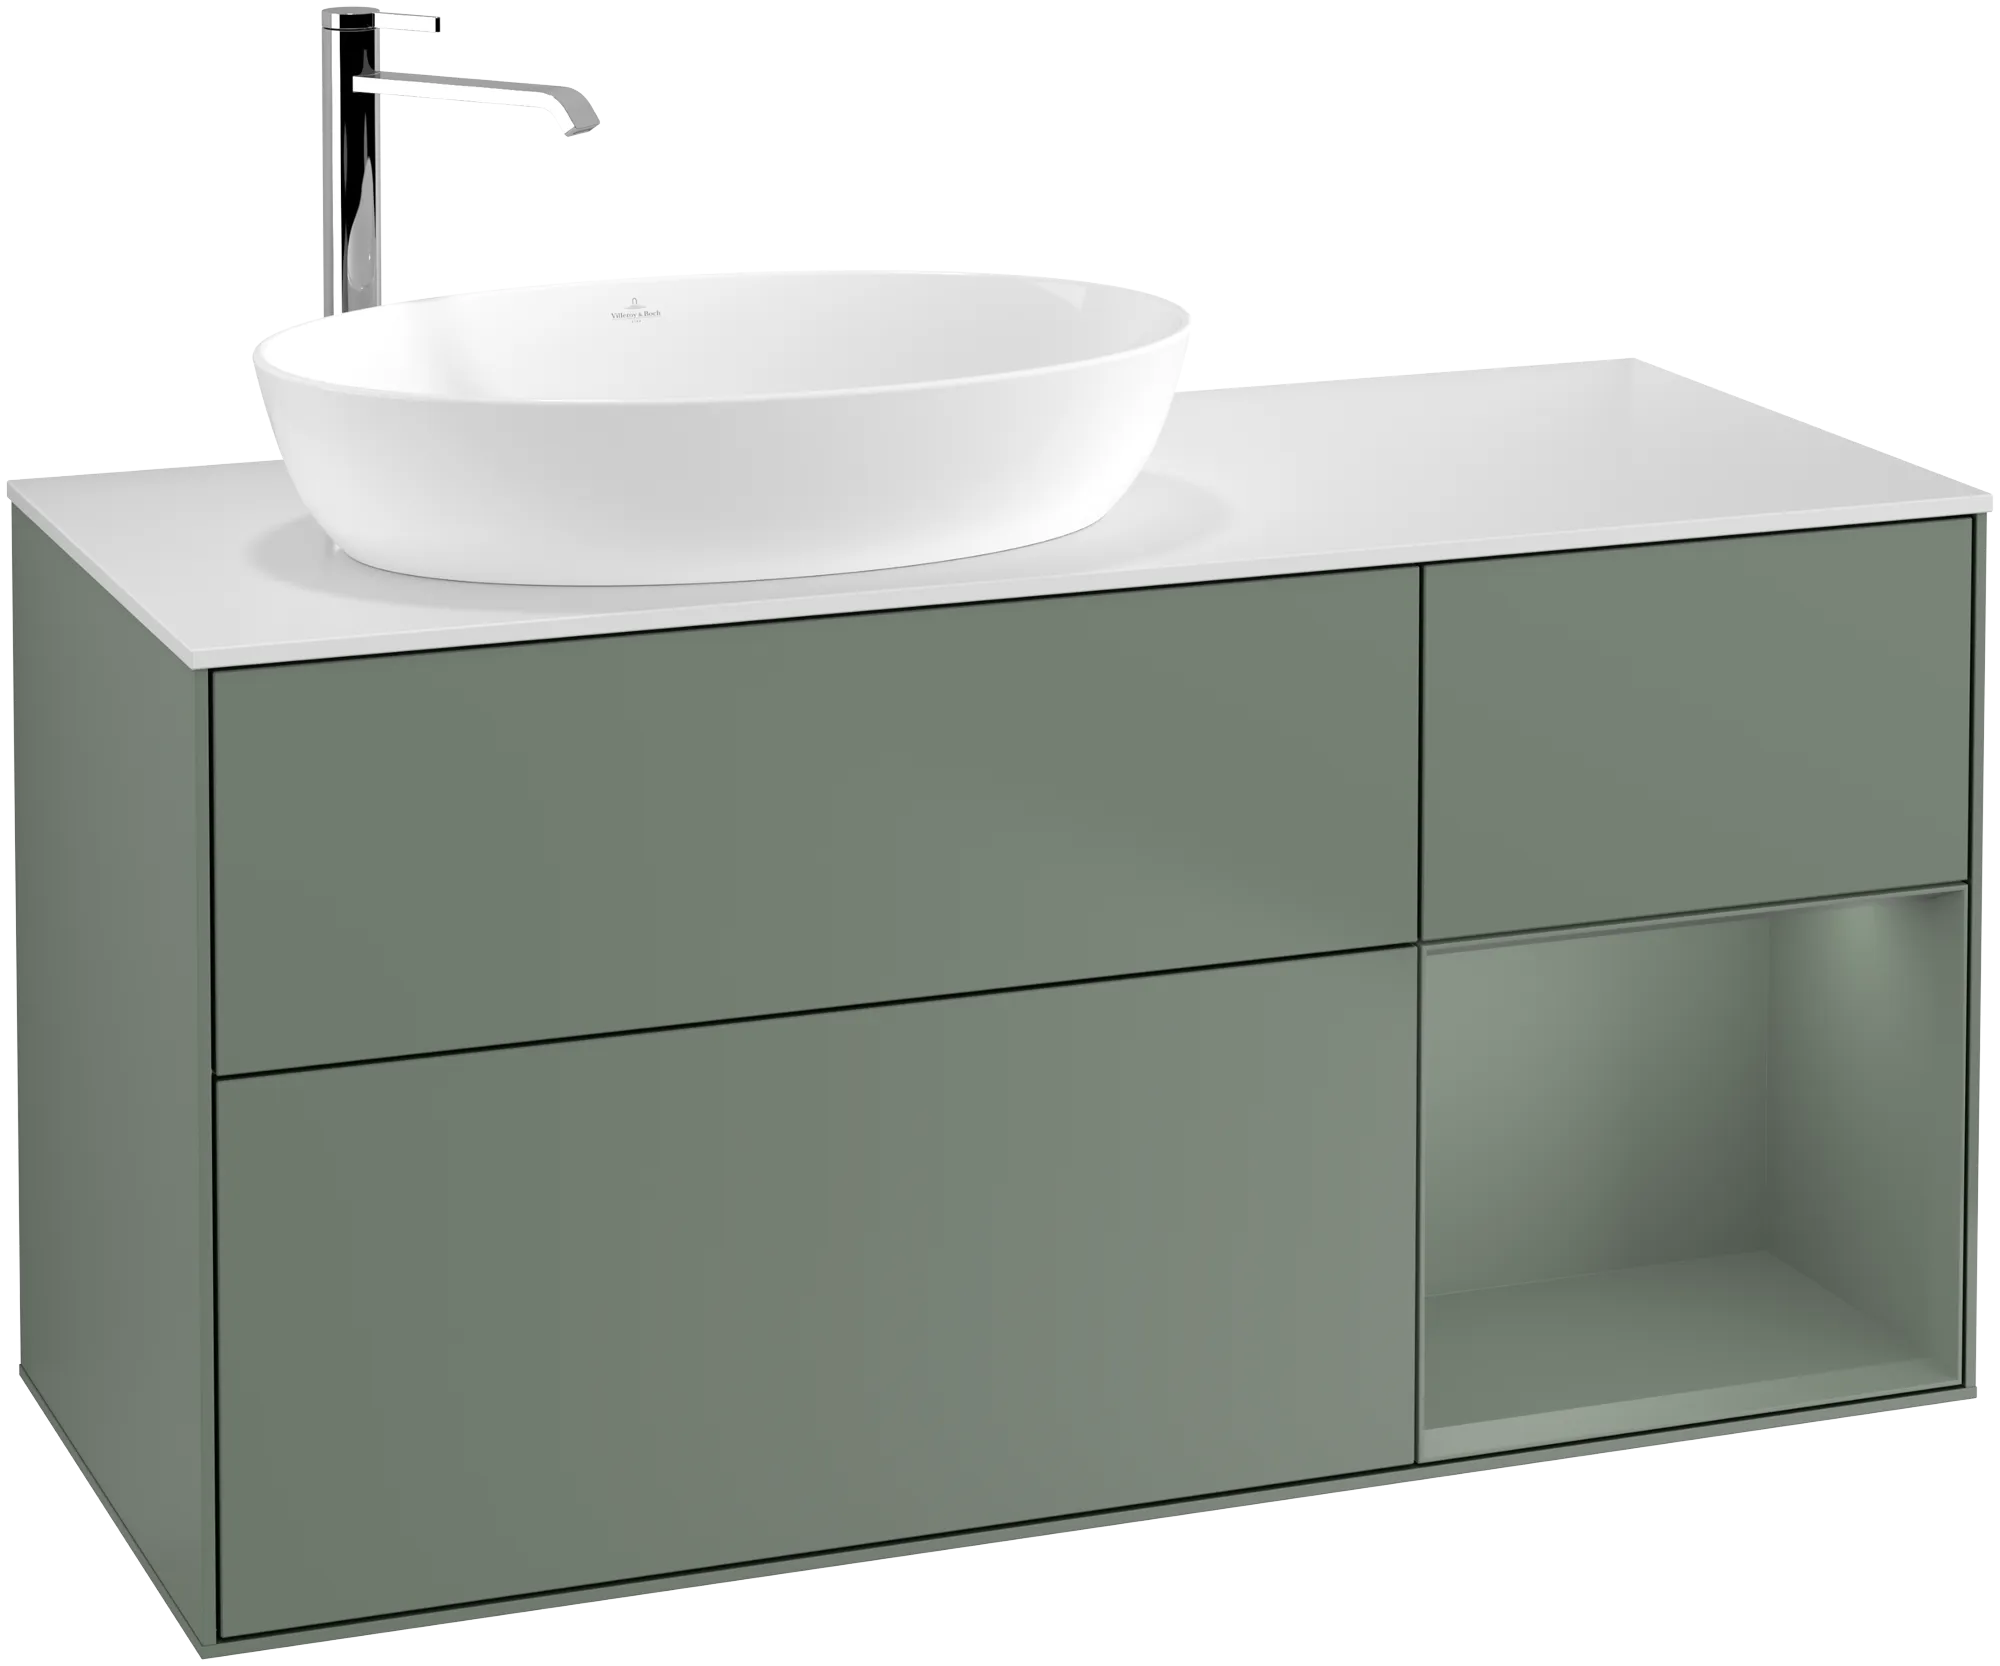 Obrázek VILLEROY BOCH Finion Vanity unit, with lighting, 3 pull-out compartments, 1200 x 603 x 501 mm, Olive Matt Lacquer / Olive Matt Lacquer / Glass White Matt #G931GMGM